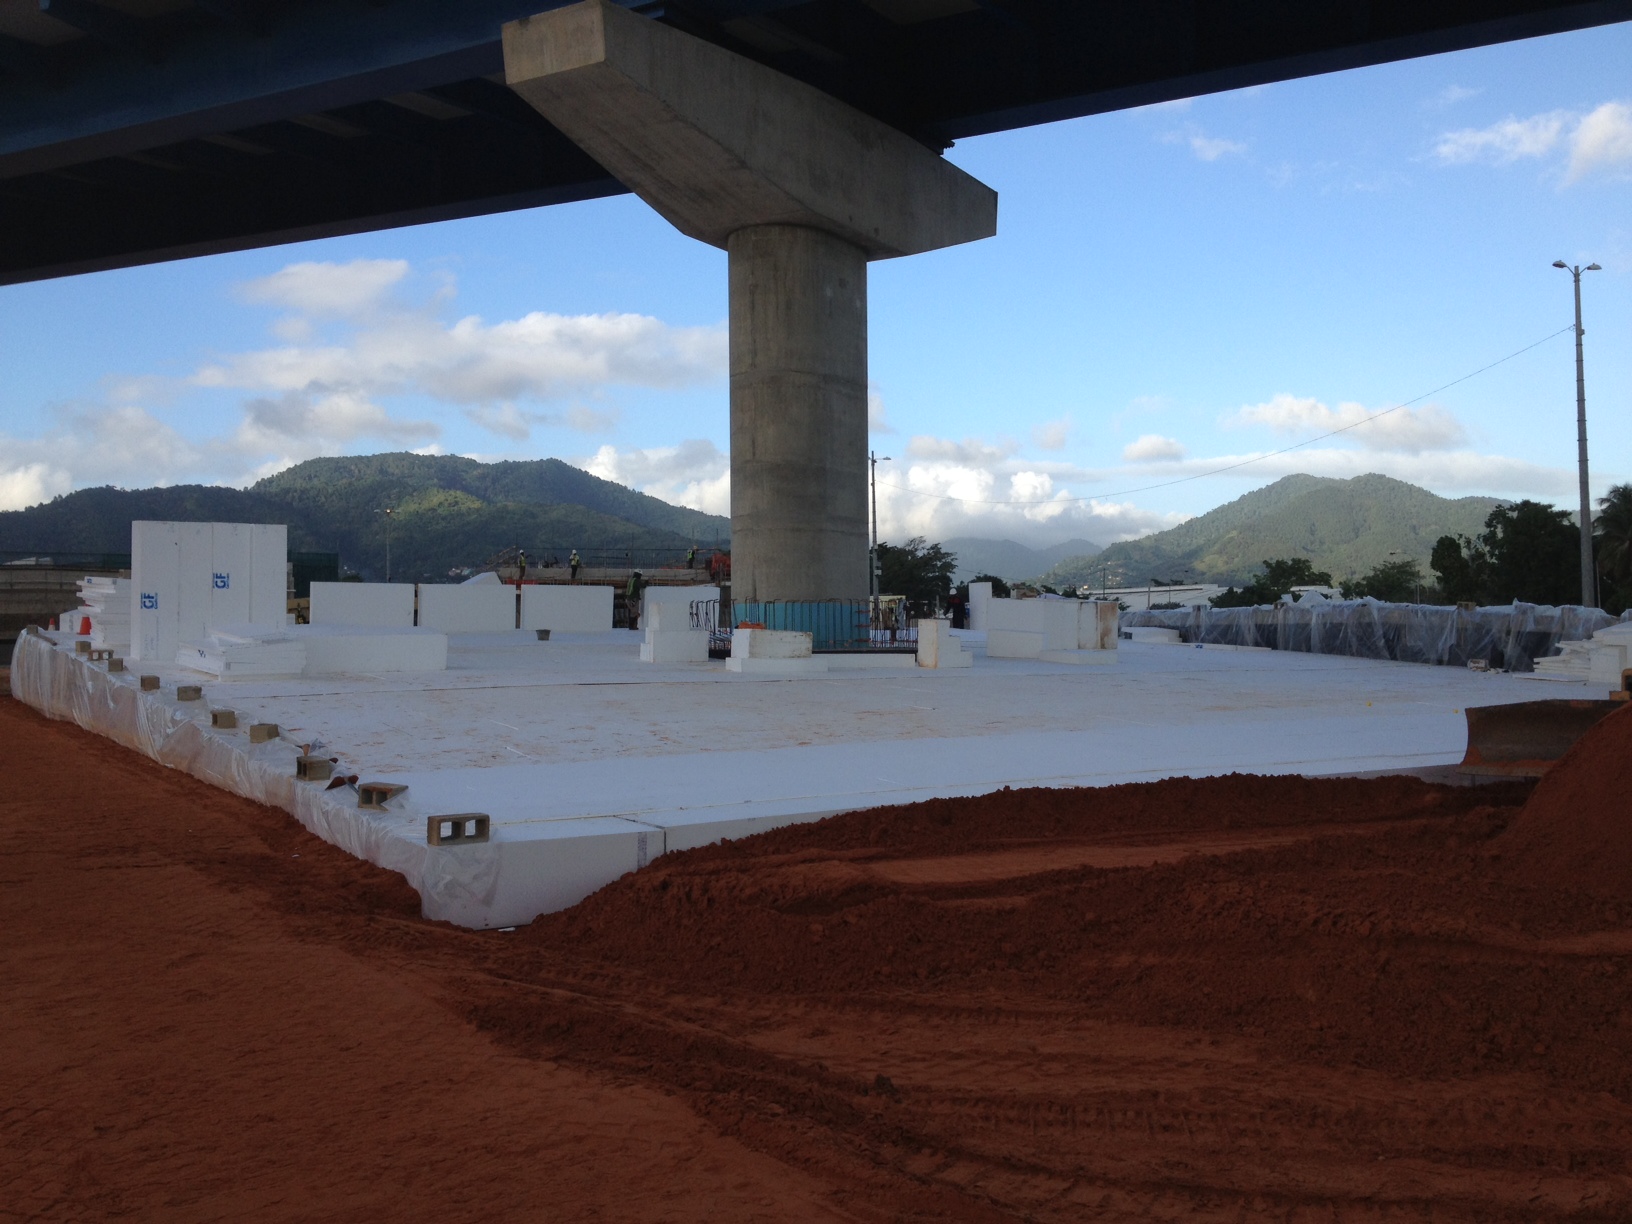 Working in the soft soils of Trinidad, the contractor specified EPS geofoam to reduce the load applied to the pile cap under the existing pier on this freeway interchange project.